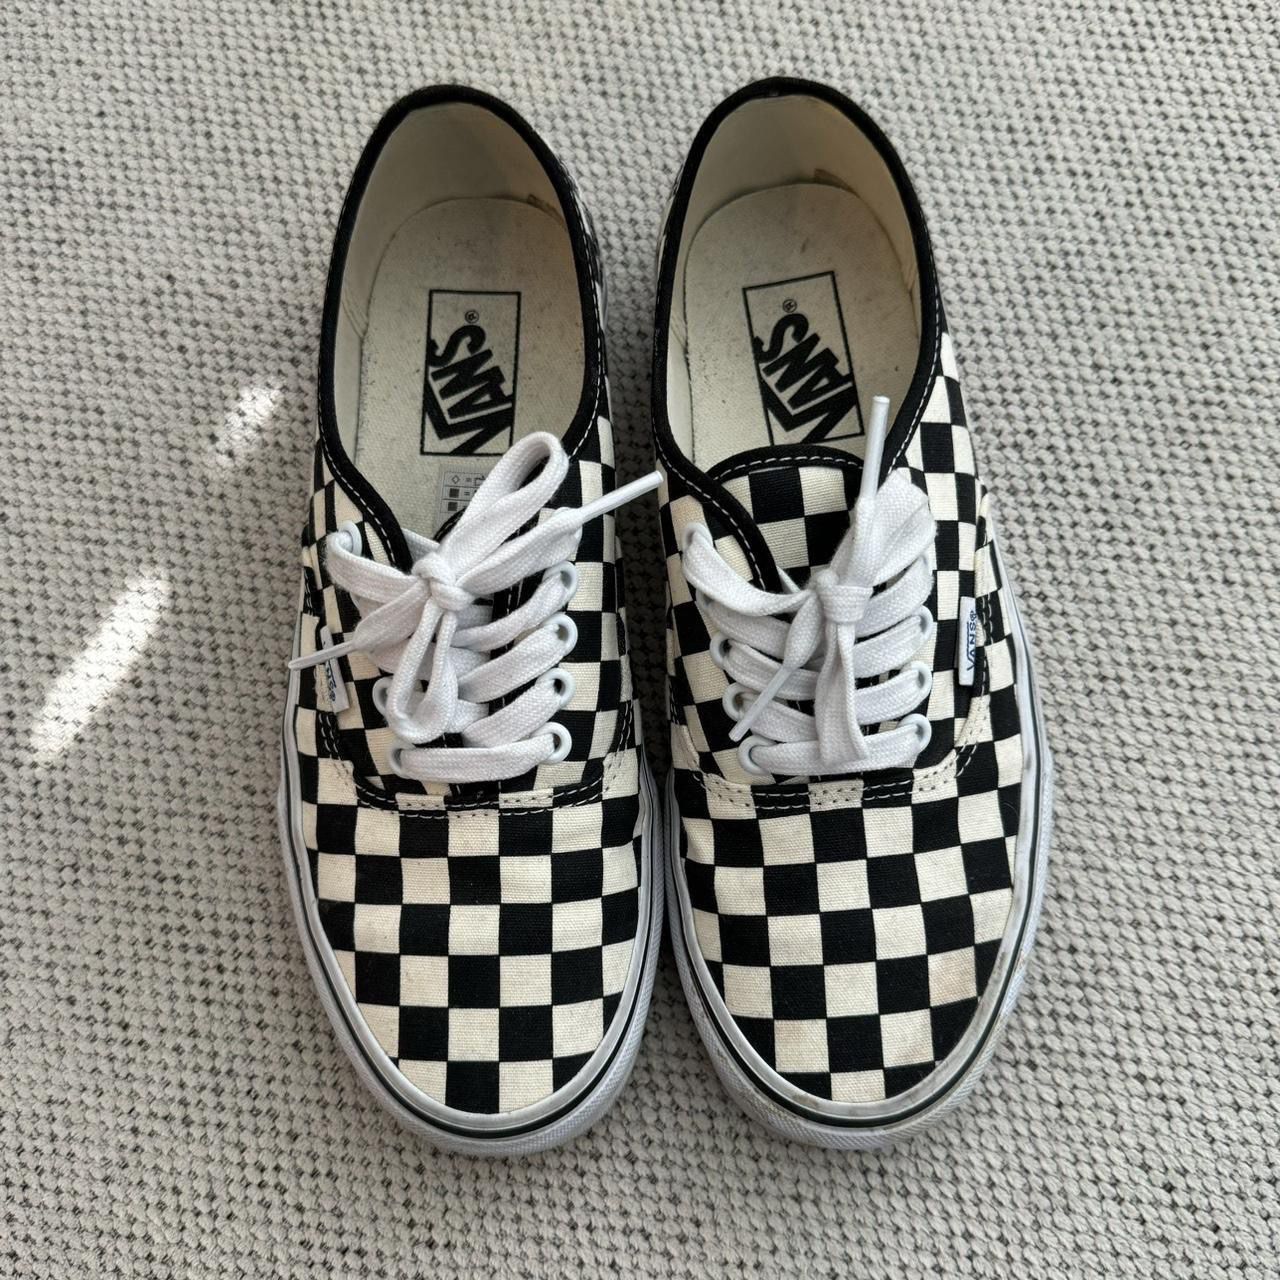 Vans Checkered Authentics Black And White Skate Shoes